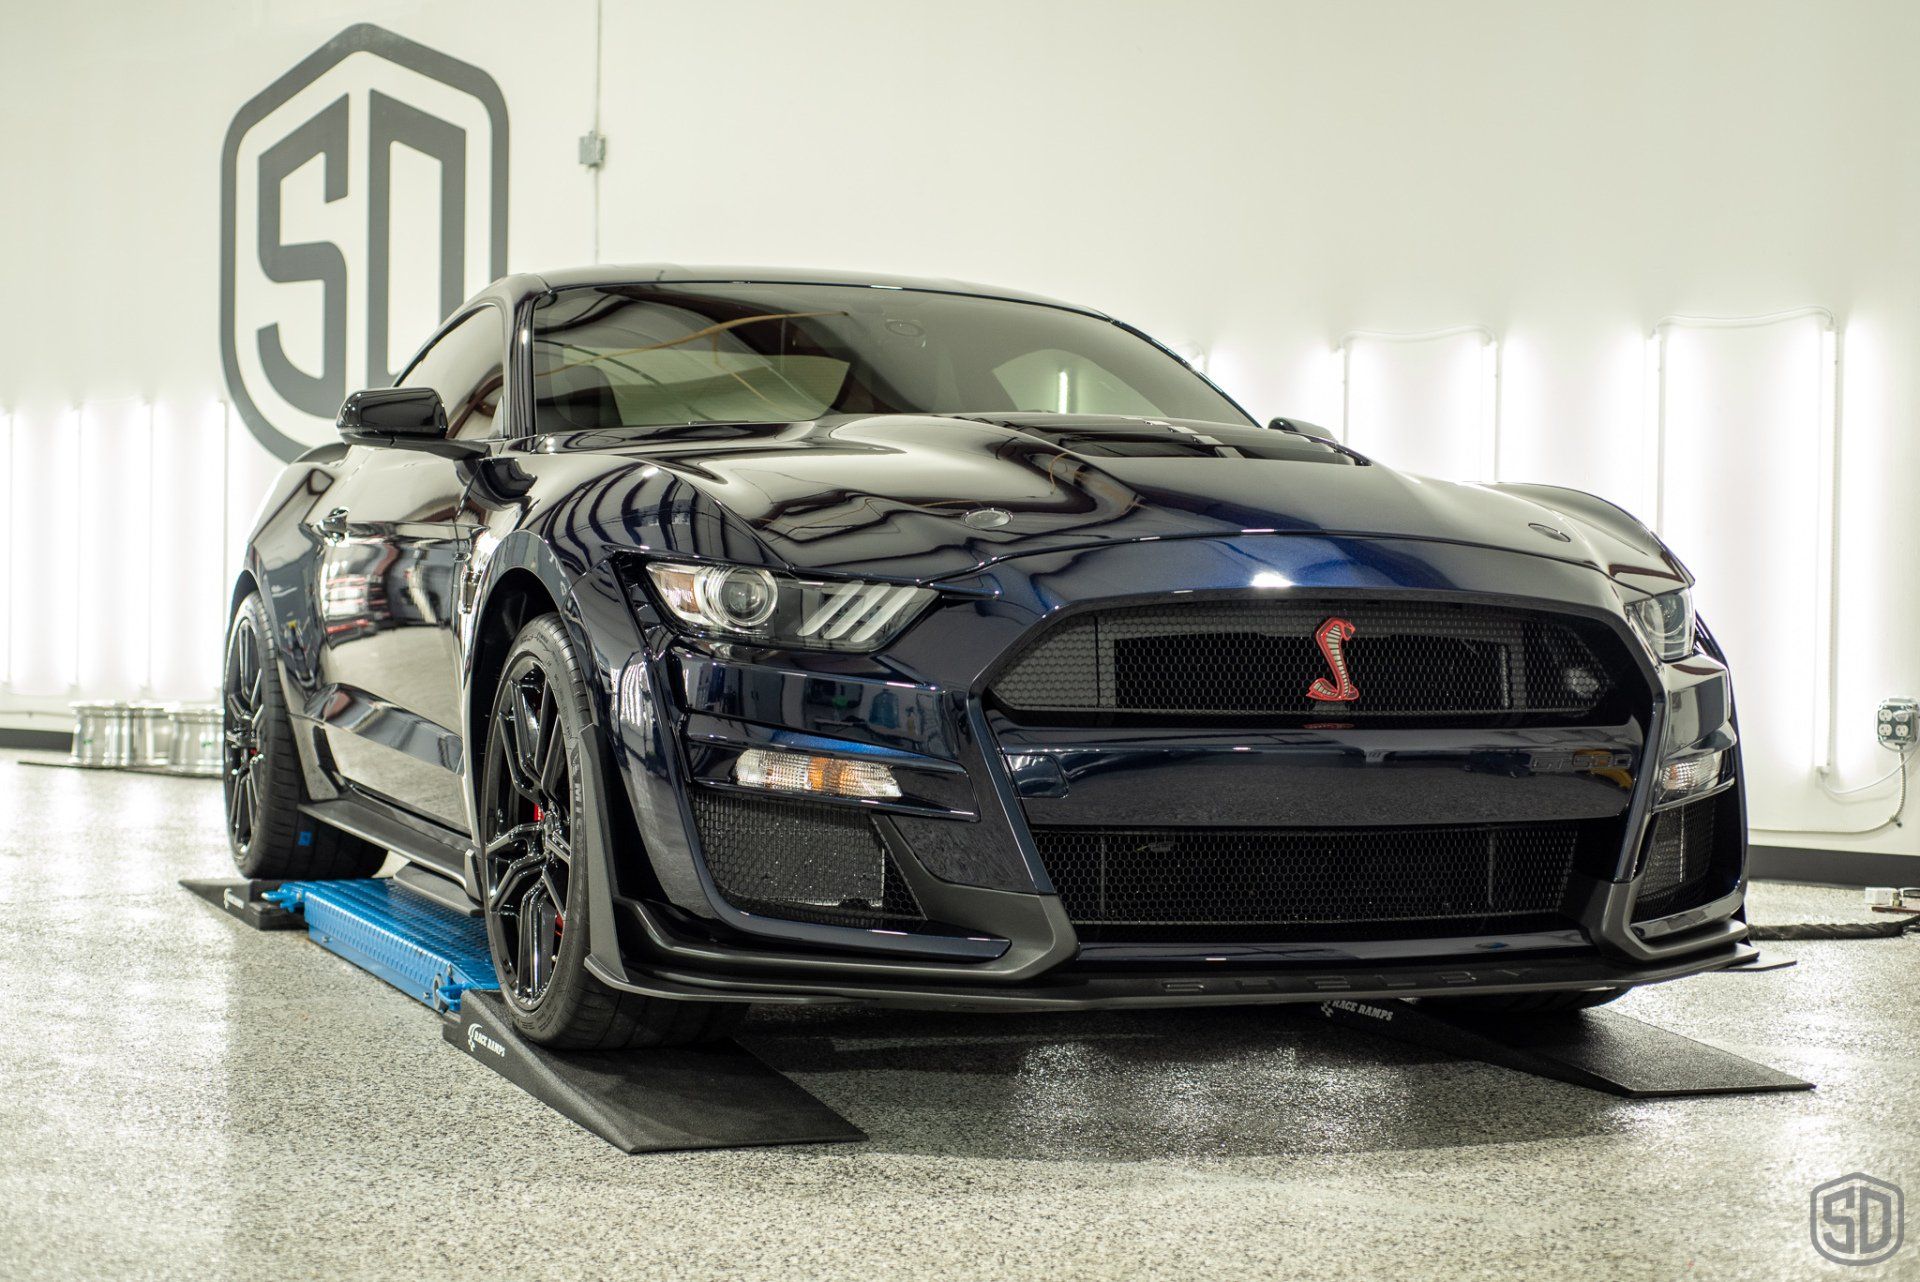 Ford Mustang GT500 level 3 paint correction, xpel ppf, stek dynoflex windshield protection film, modesta BC05 advanced water repellent glass coating, BC06 wheel and caliper protective coating Orlando Florida